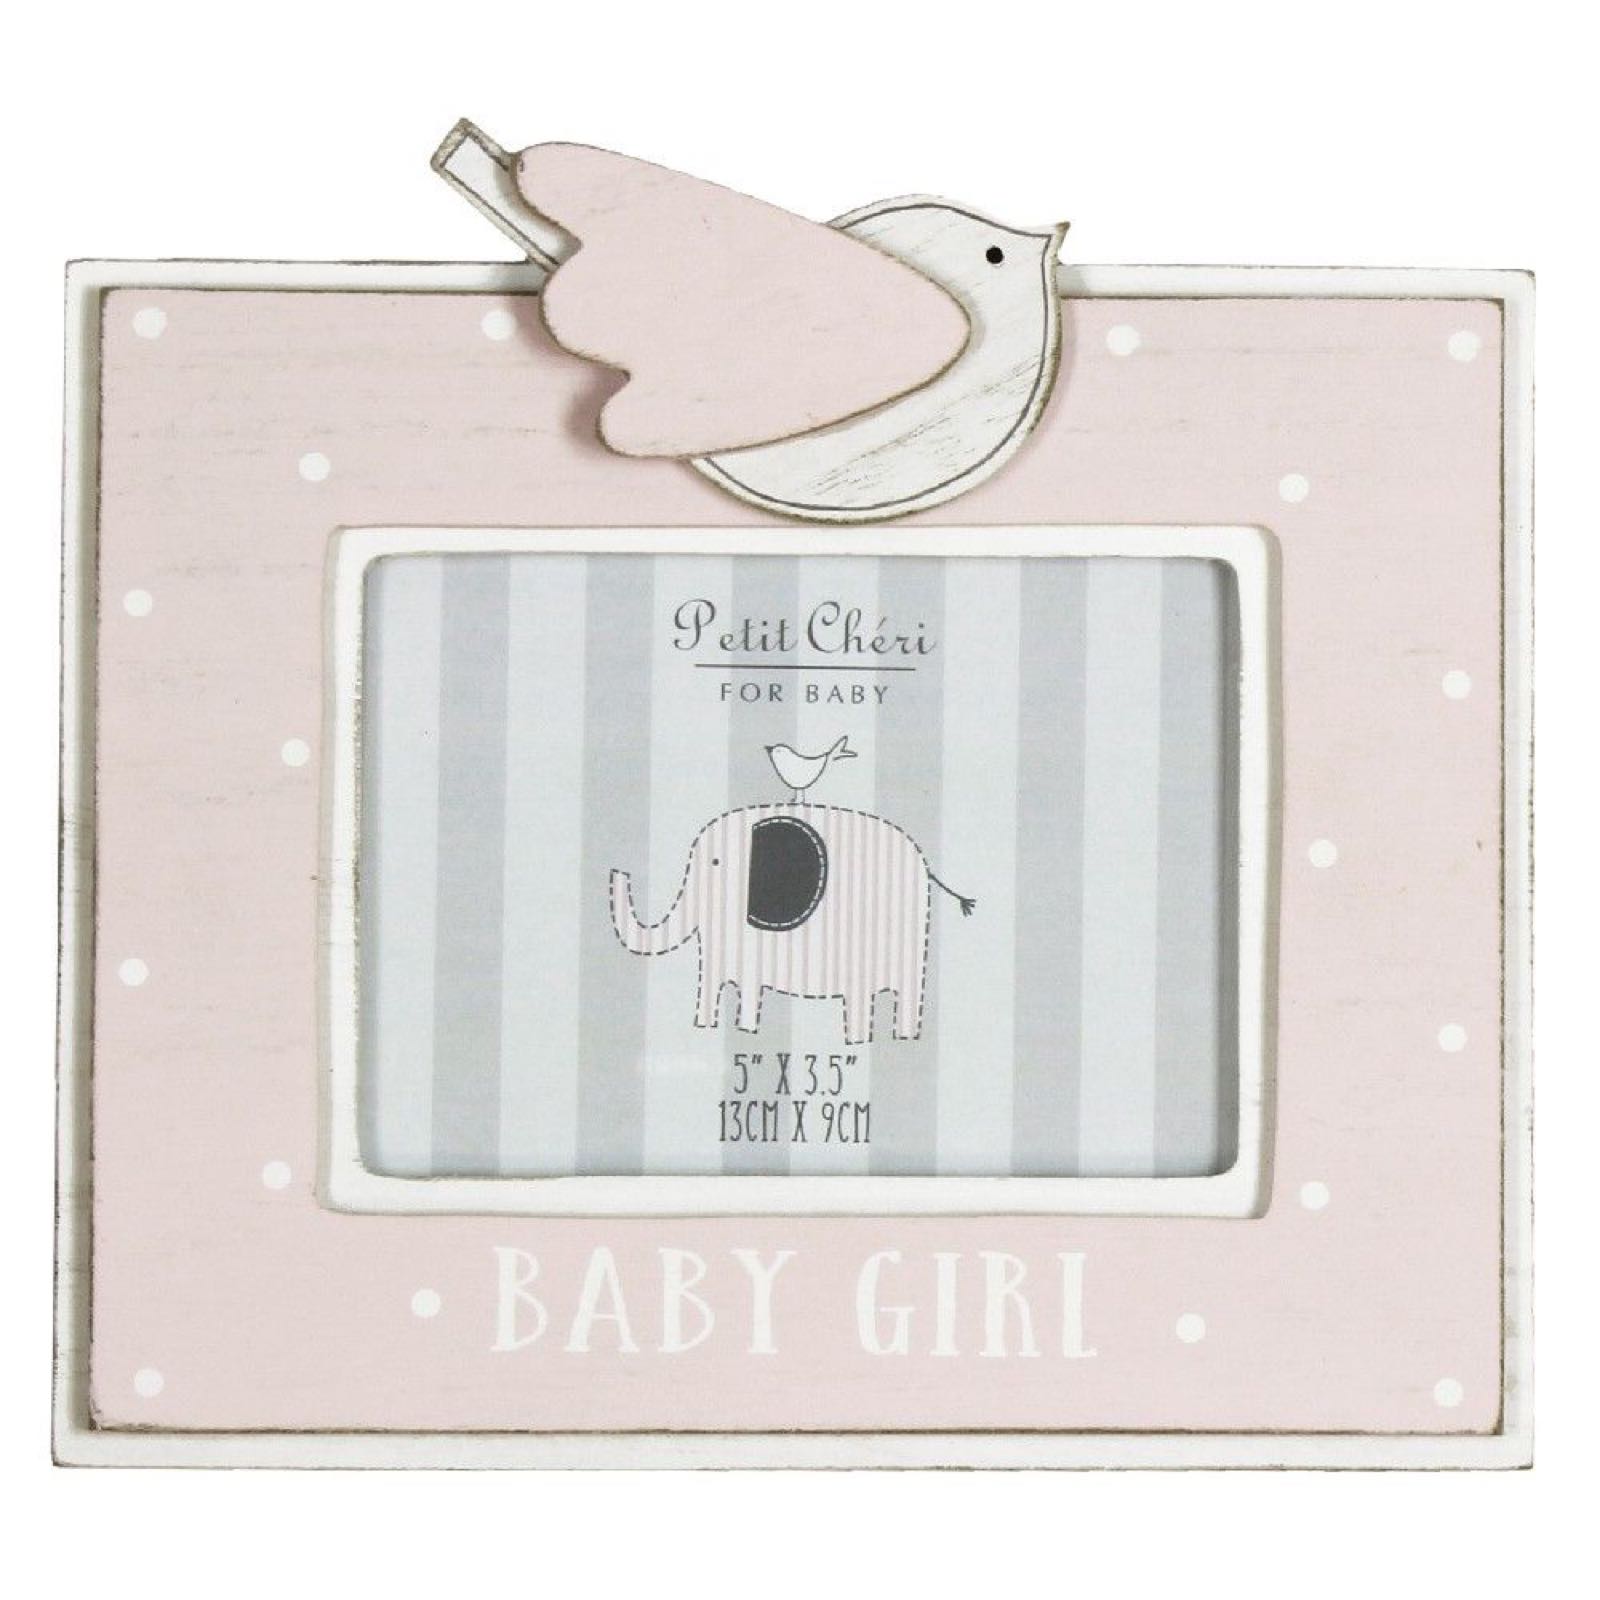 5”x3.5” Bird Baby Girl Photo Frame  (can be engraved)